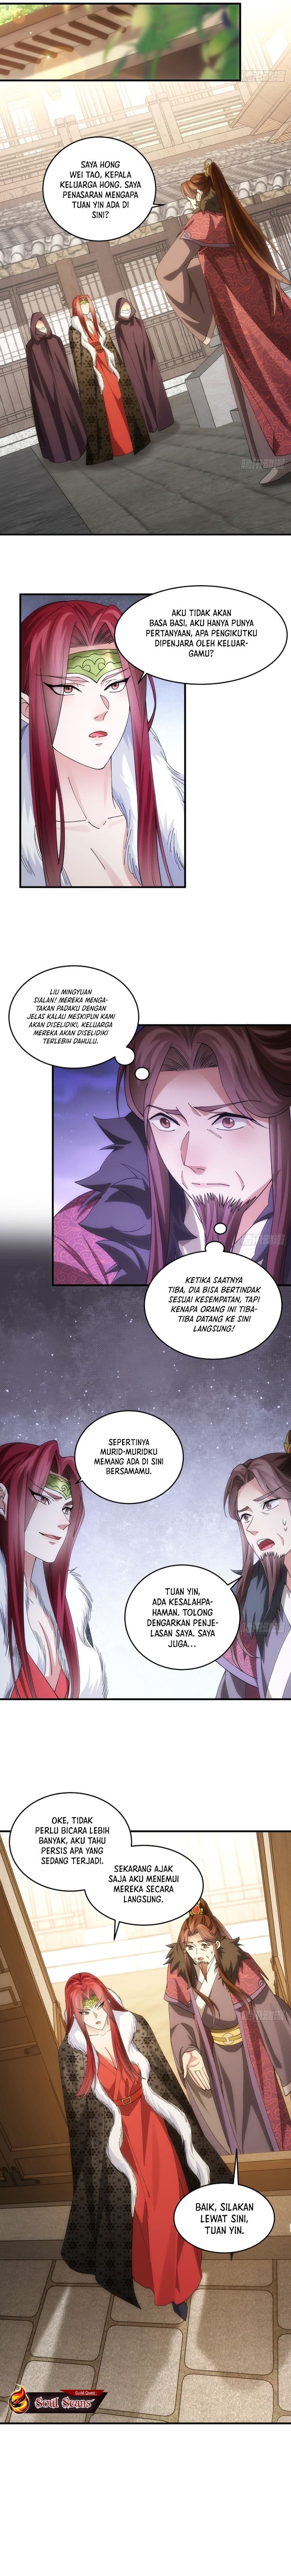 Dilarang COPAS - situs resmi www.mangacanblog.com - Komik i just dont play the card according to the routine 146 - chapter 146 147 Indonesia i just dont play the card according to the routine 146 - chapter 146 Terbaru 7|Baca Manga Komik Indonesia|Mangacan